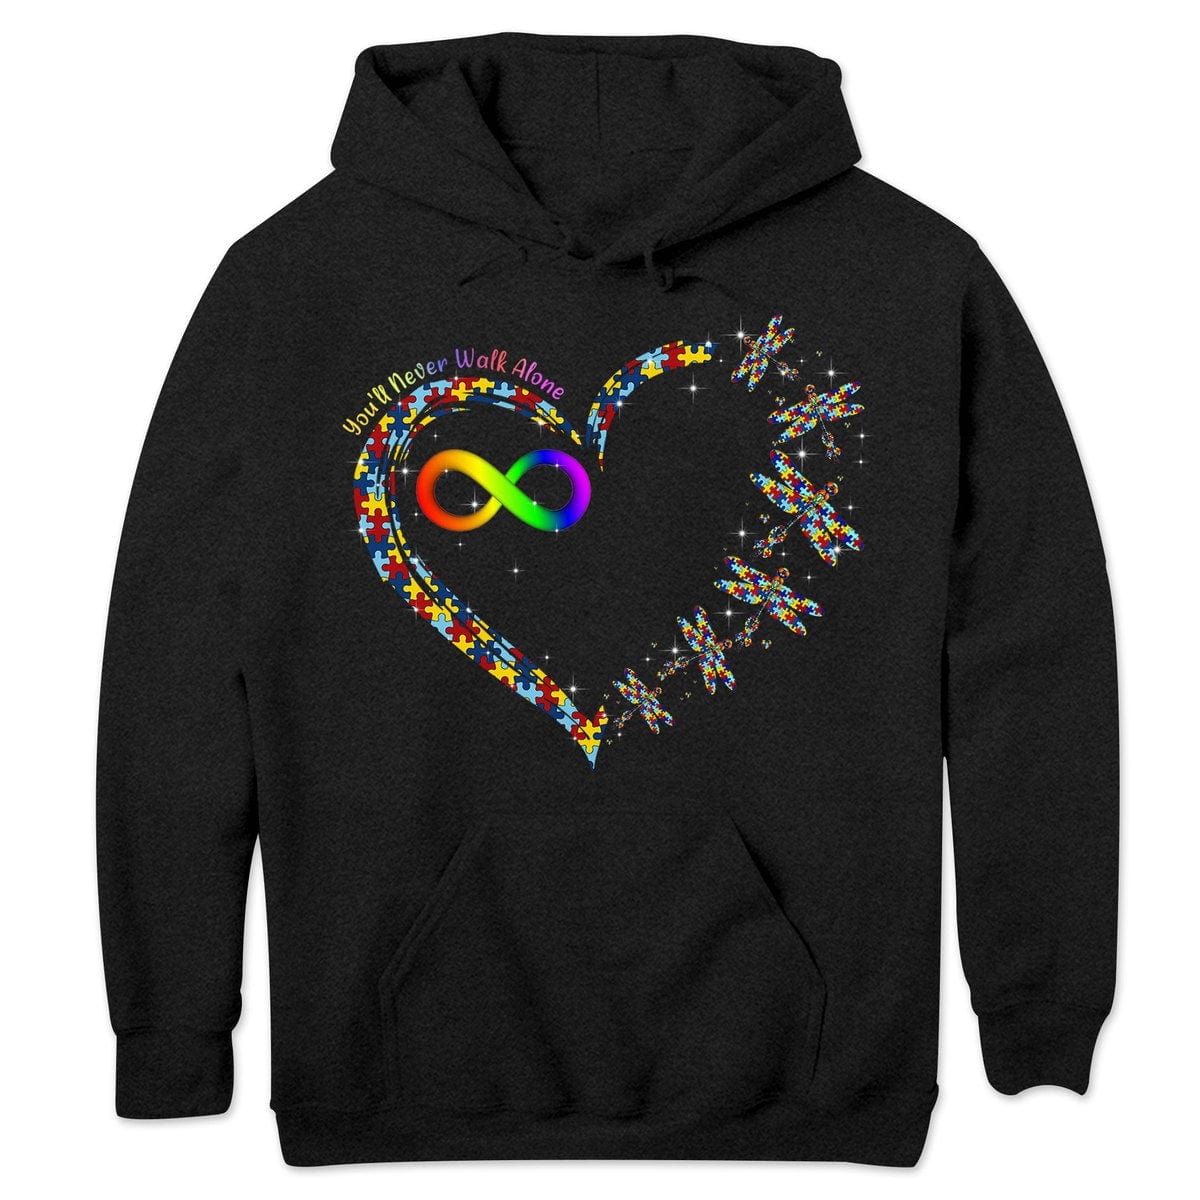 You'll Never Walk Alone With Puzzle Piece Heart Dragonfly & Rainbow Infinity Autism Hoodie, Shirts